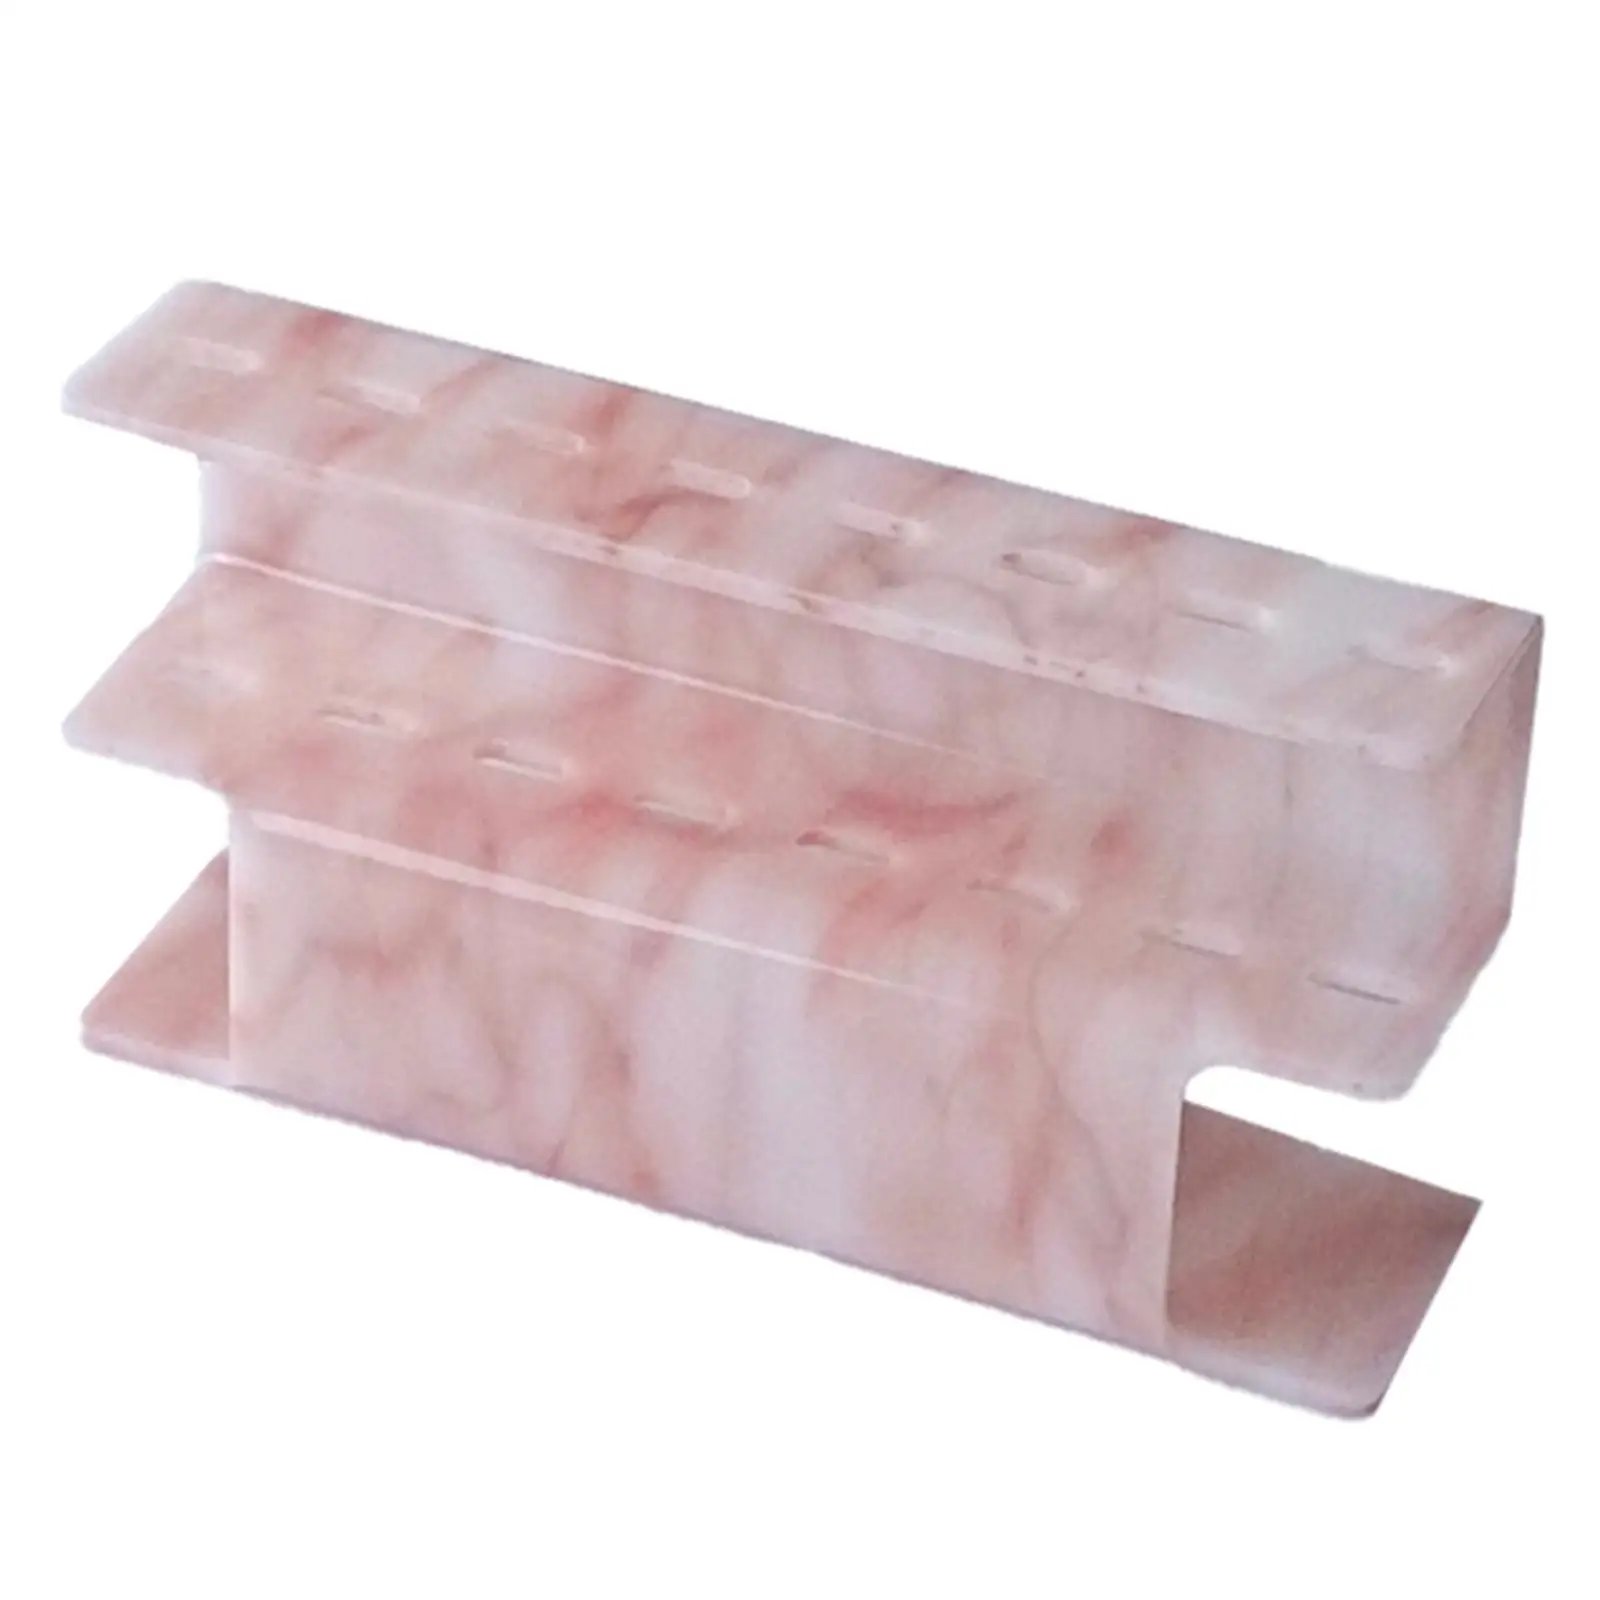 8 Holes  Stand for Salon Pink Marble Make up Supplies Acrylic  Storage Holder  Holder s Shelf Holder for Home